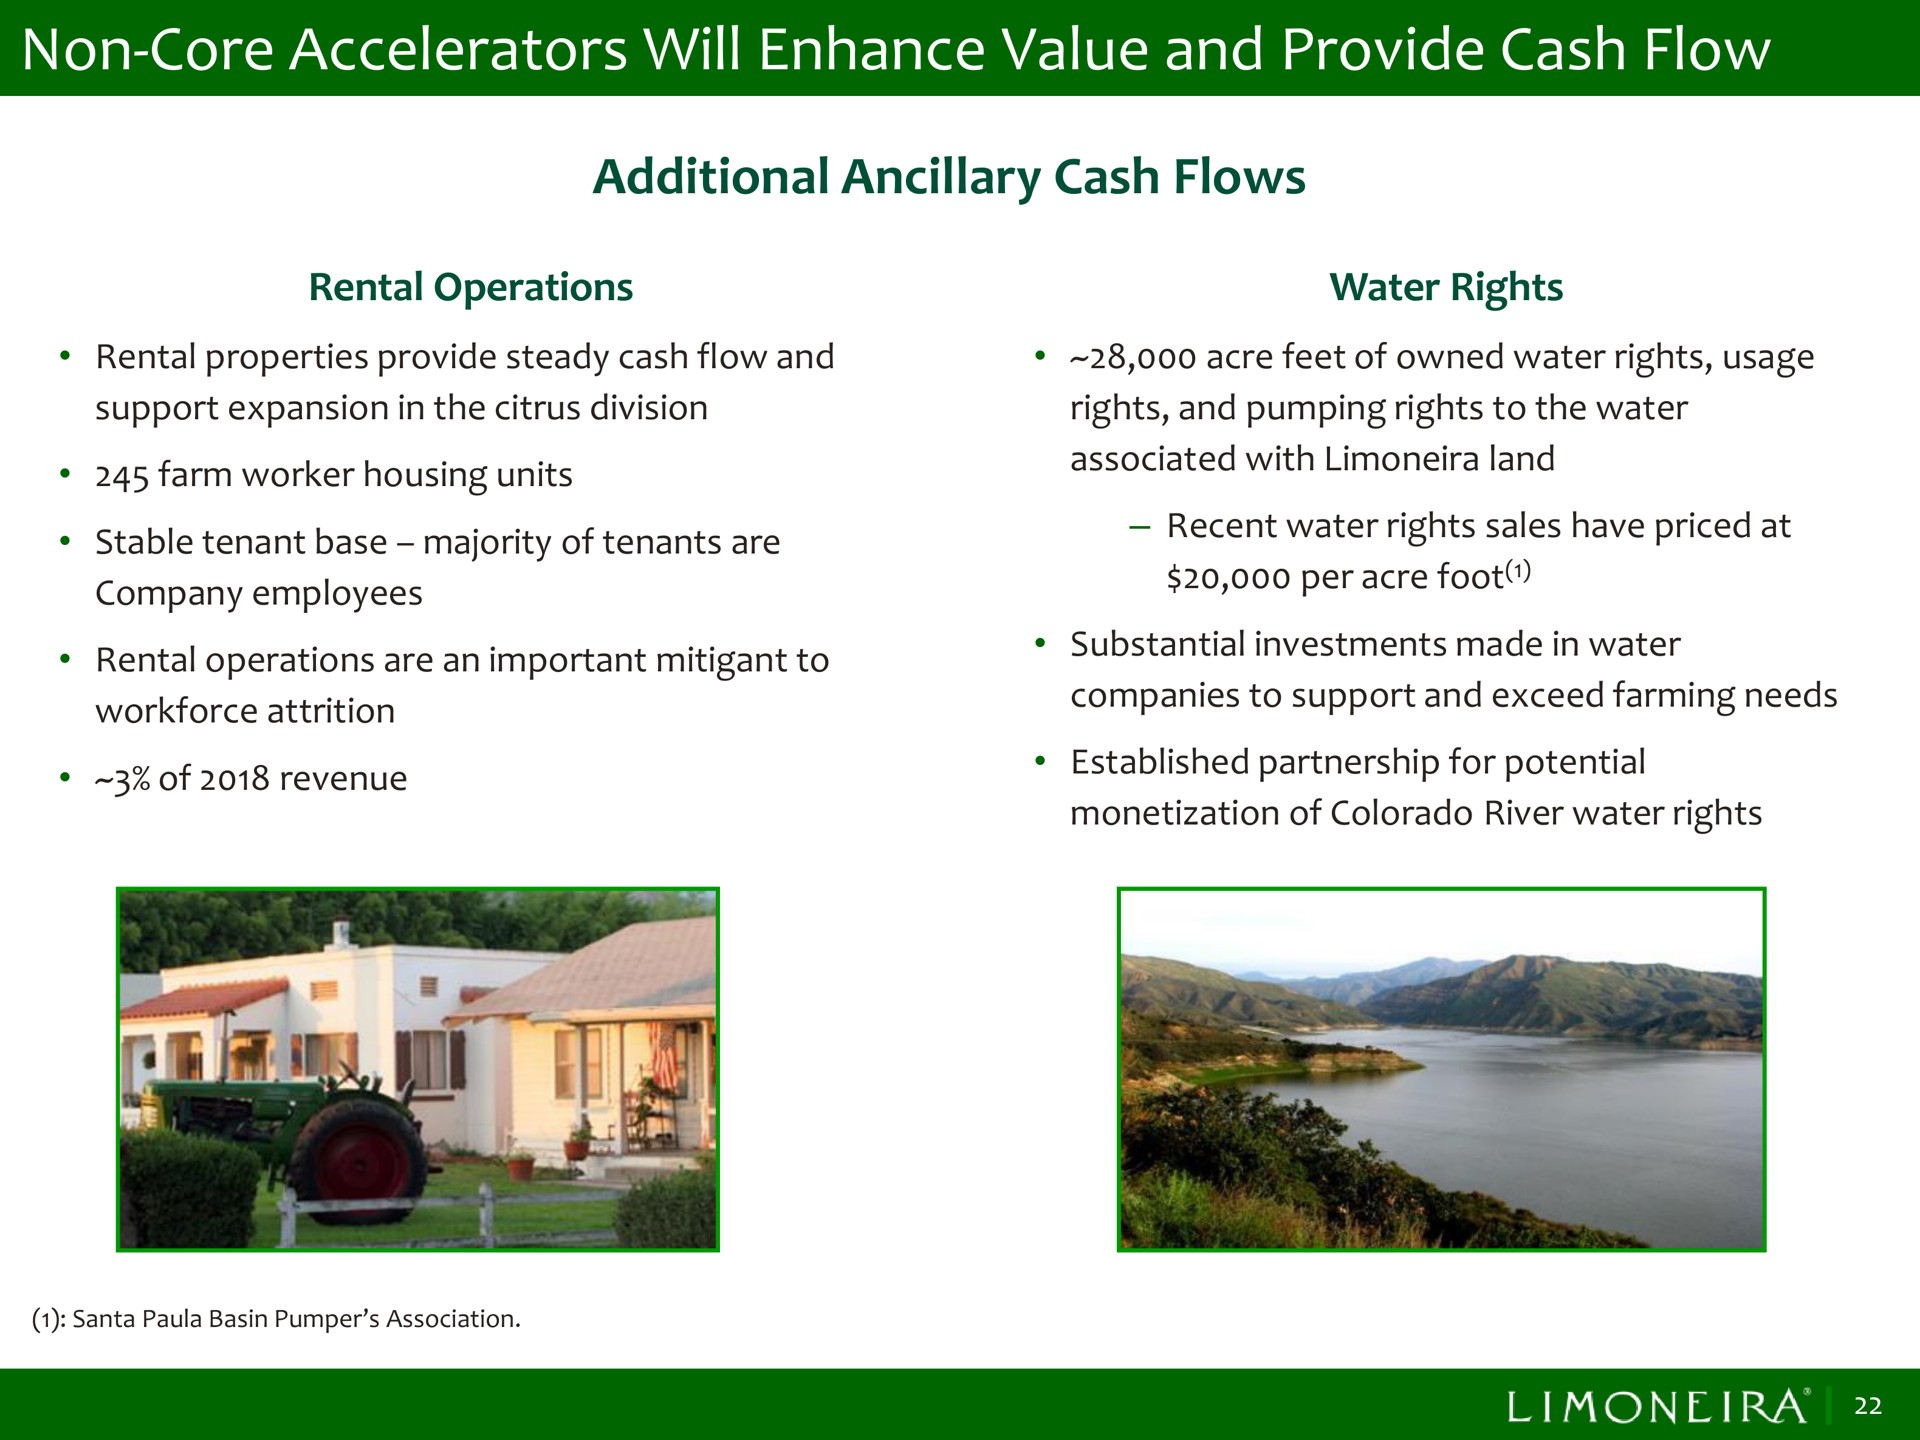 non core accelerators will enhance value and provide cash flow additional ancillary cash flows | Limoneira